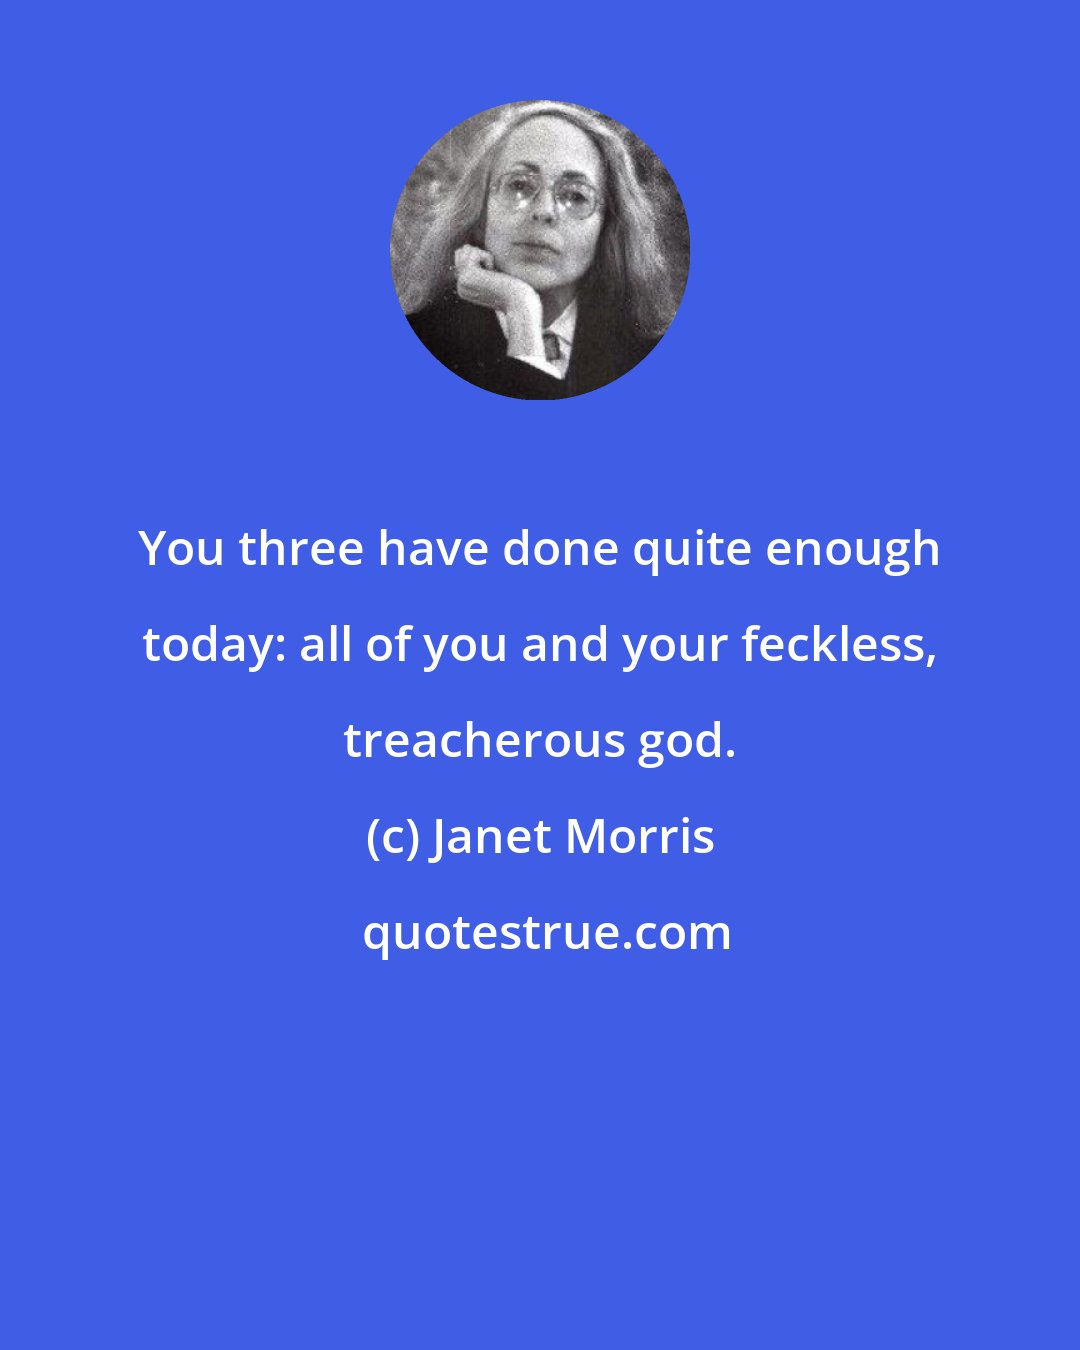 Janet Morris: You three have done quite enough today: all of you and your feckless, treacherous god.